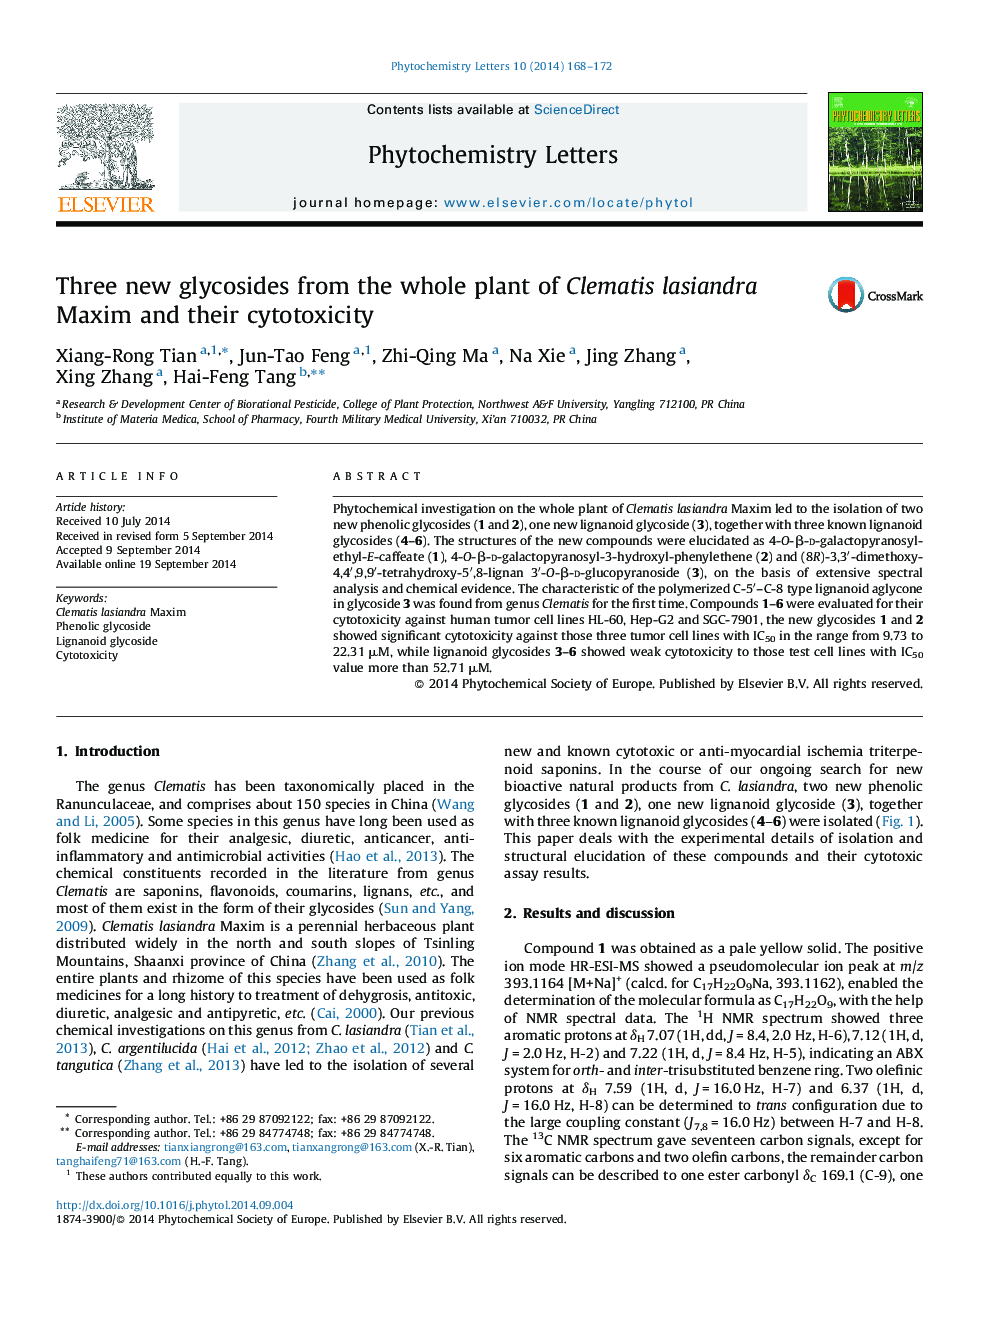 Three new glycosides from the whole plant of Clematis lasiandra Maxim and their cytotoxicity